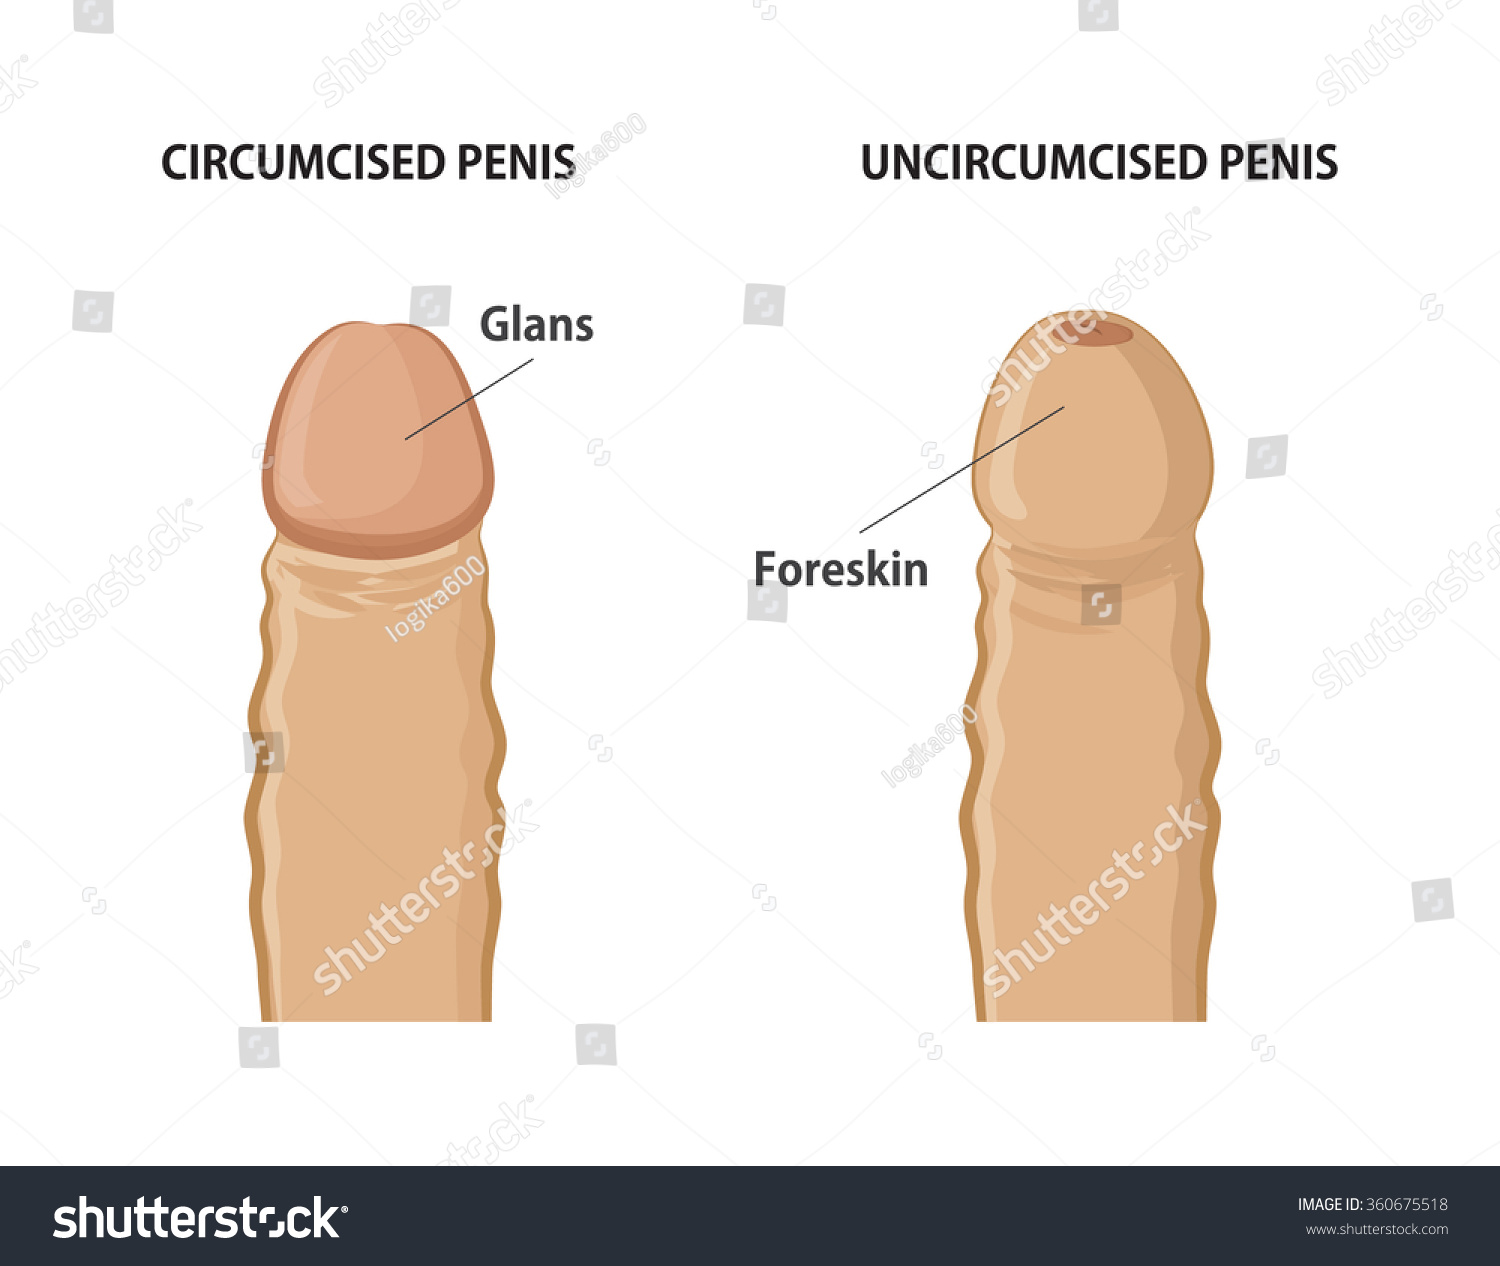 Picture Of A Uncircumsized Penis 100